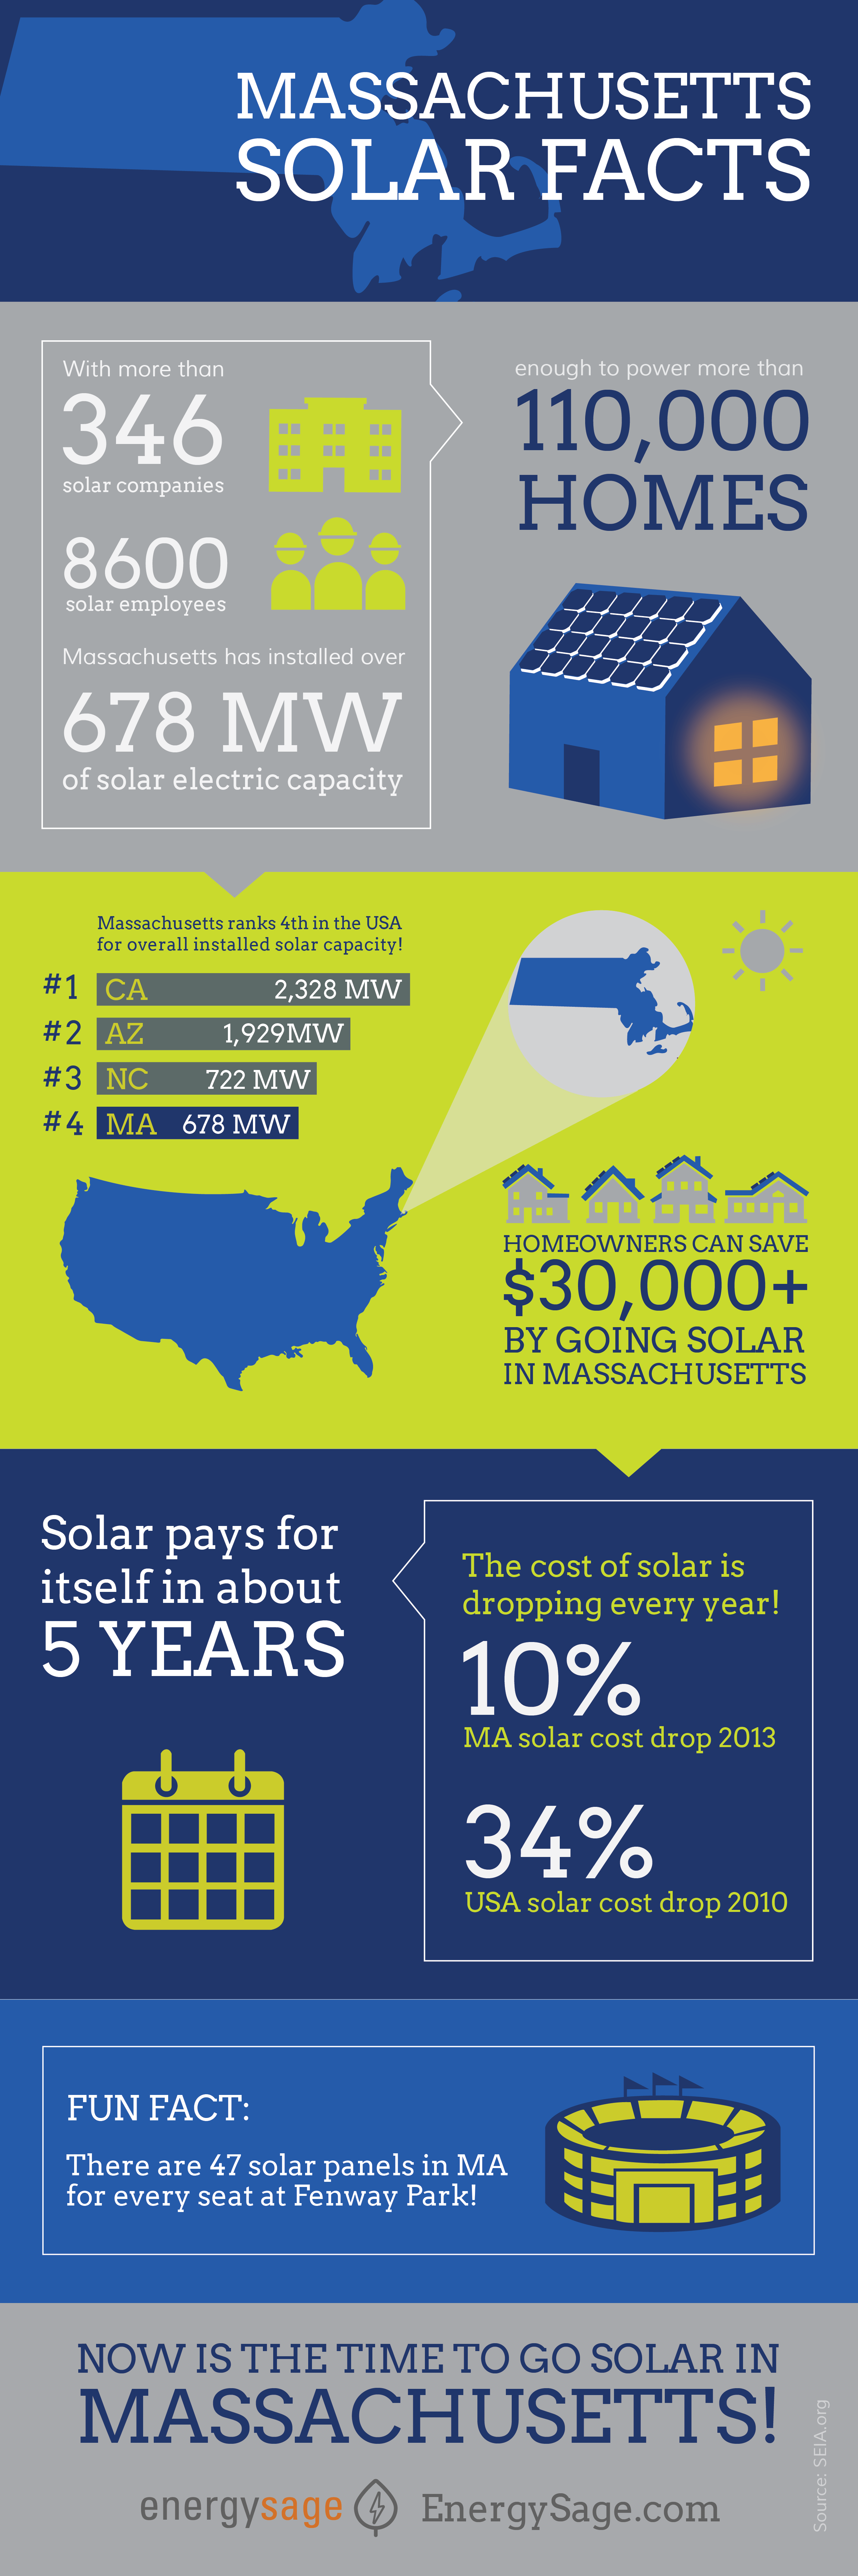 massachusetts-solar-incentives-a-complete-guide-to-solar-rebates-tax